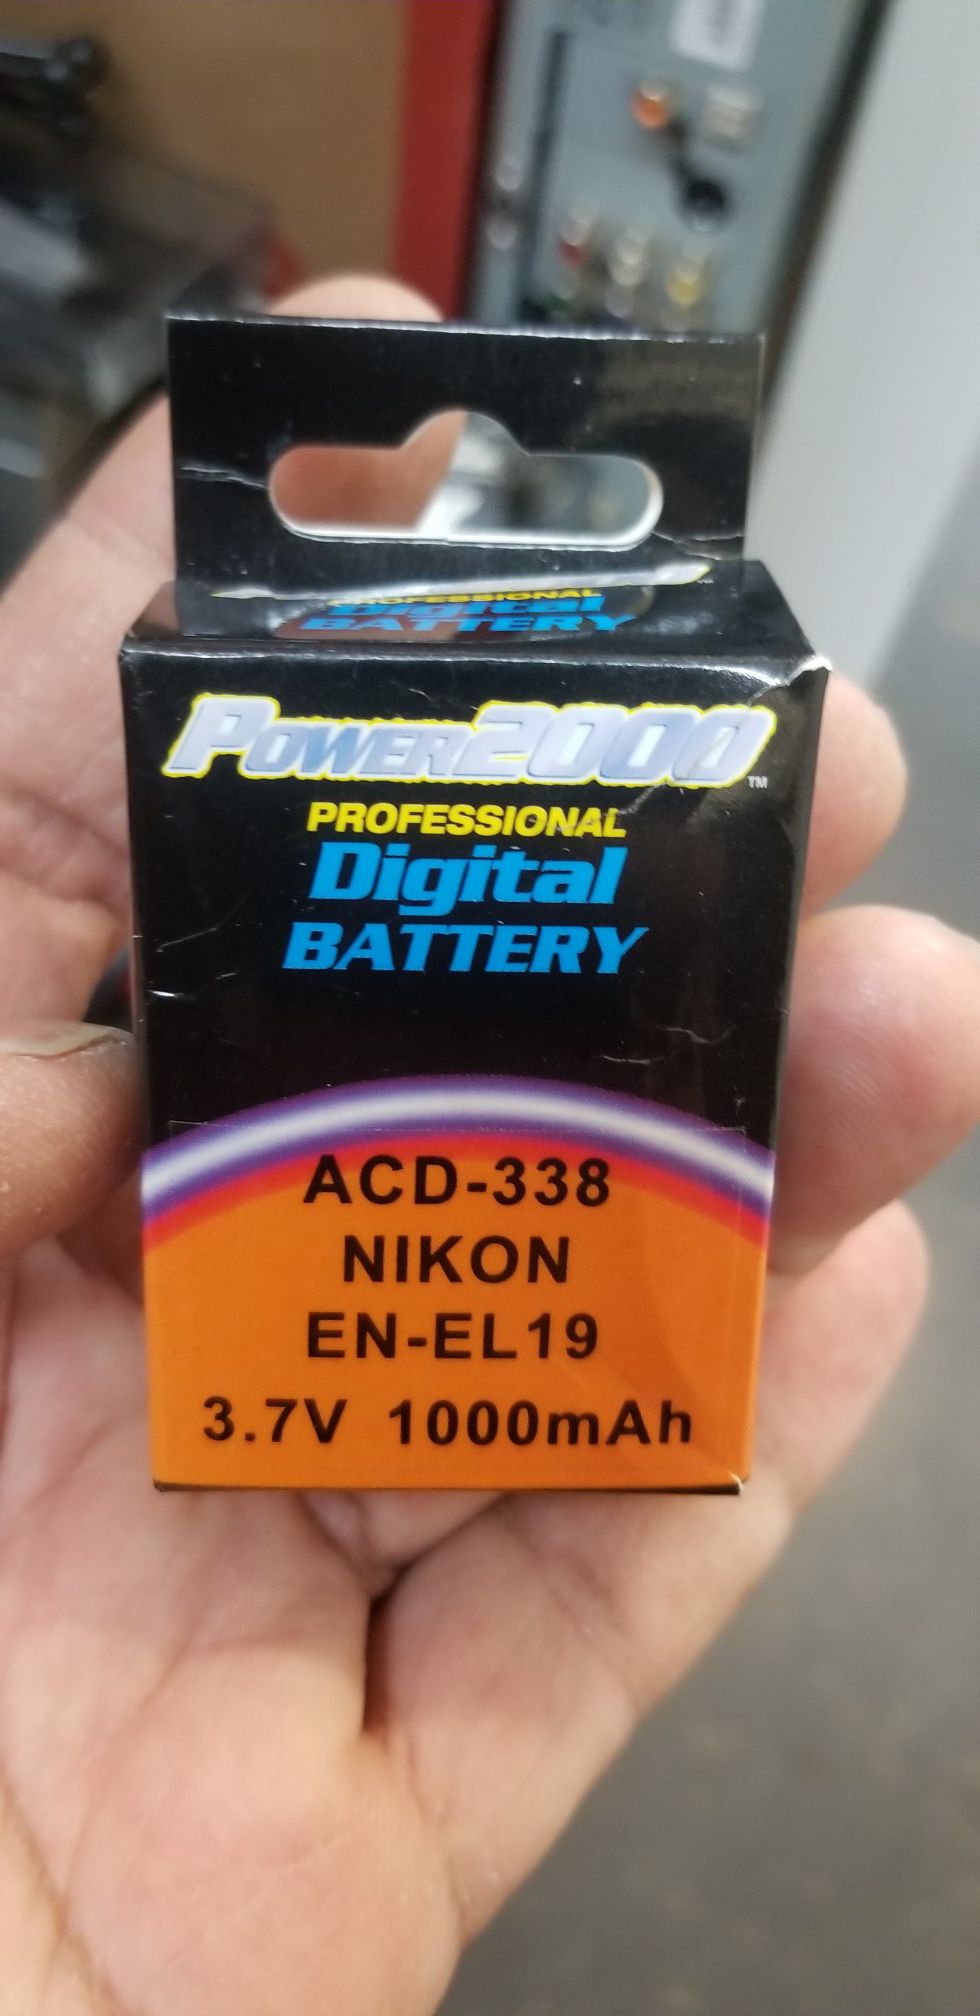 Camera Battery Fits Nikon Coolpix S32 or S33